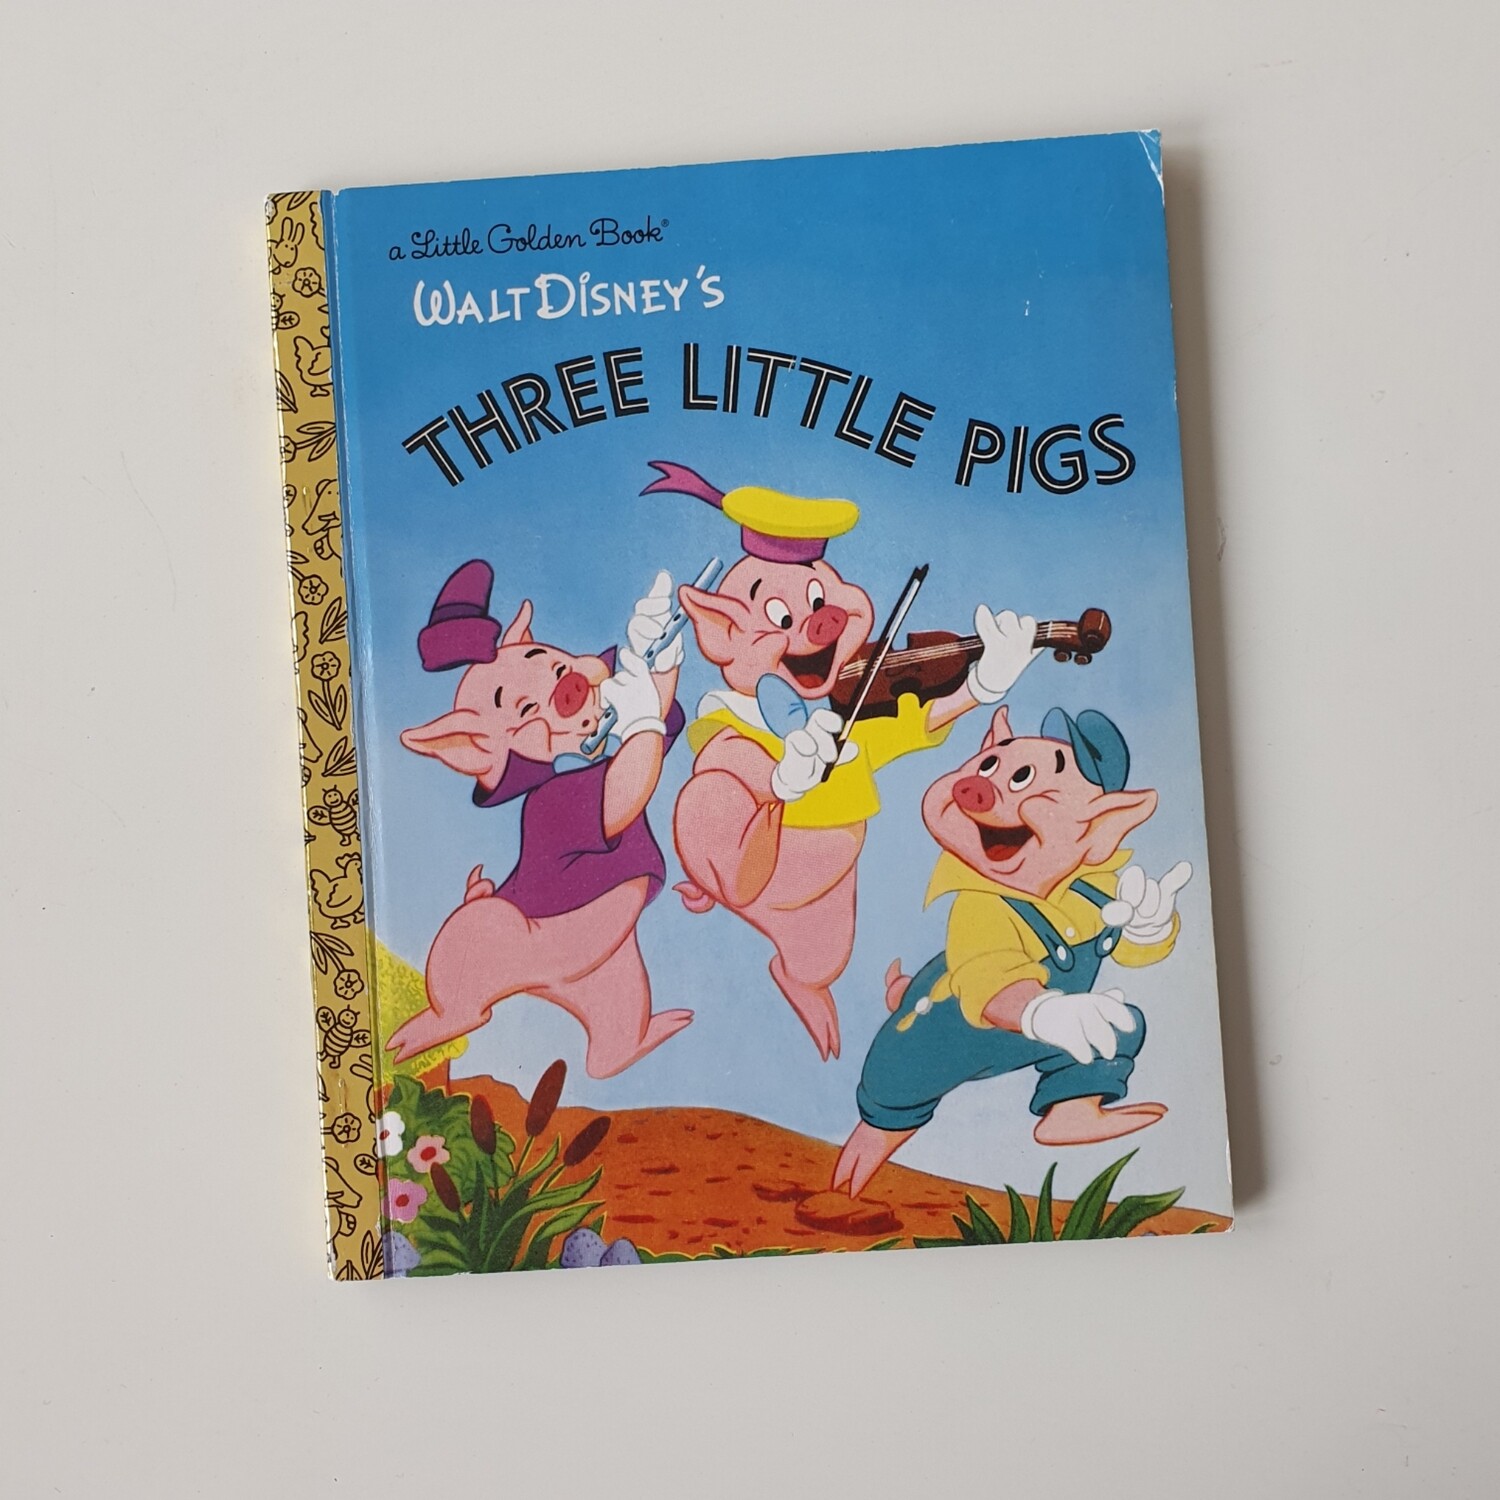 Three Little Pigs Notebook - board book will come with metal book corners included